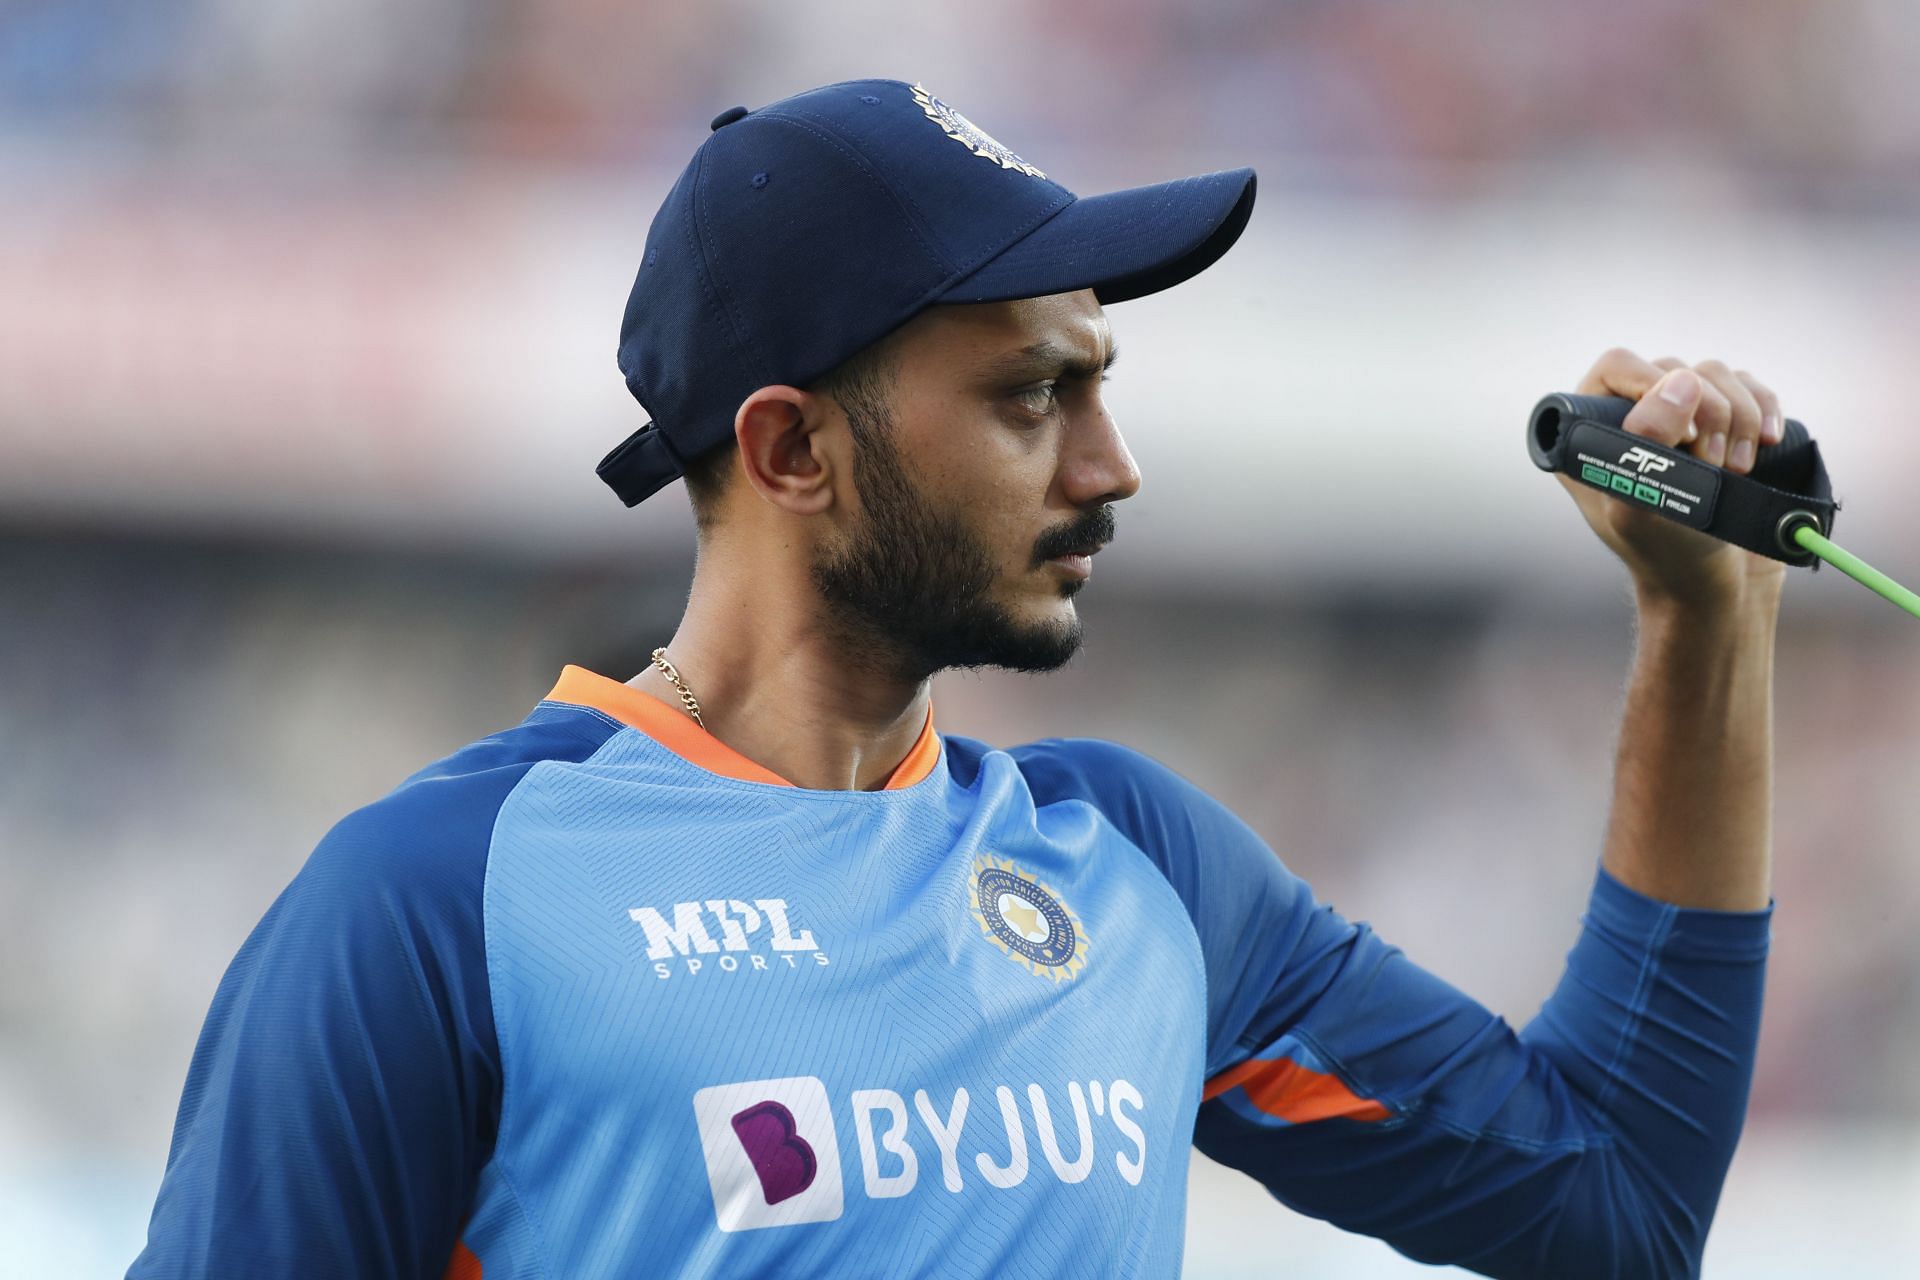 Axar Patel is going through a purple patch with the bat